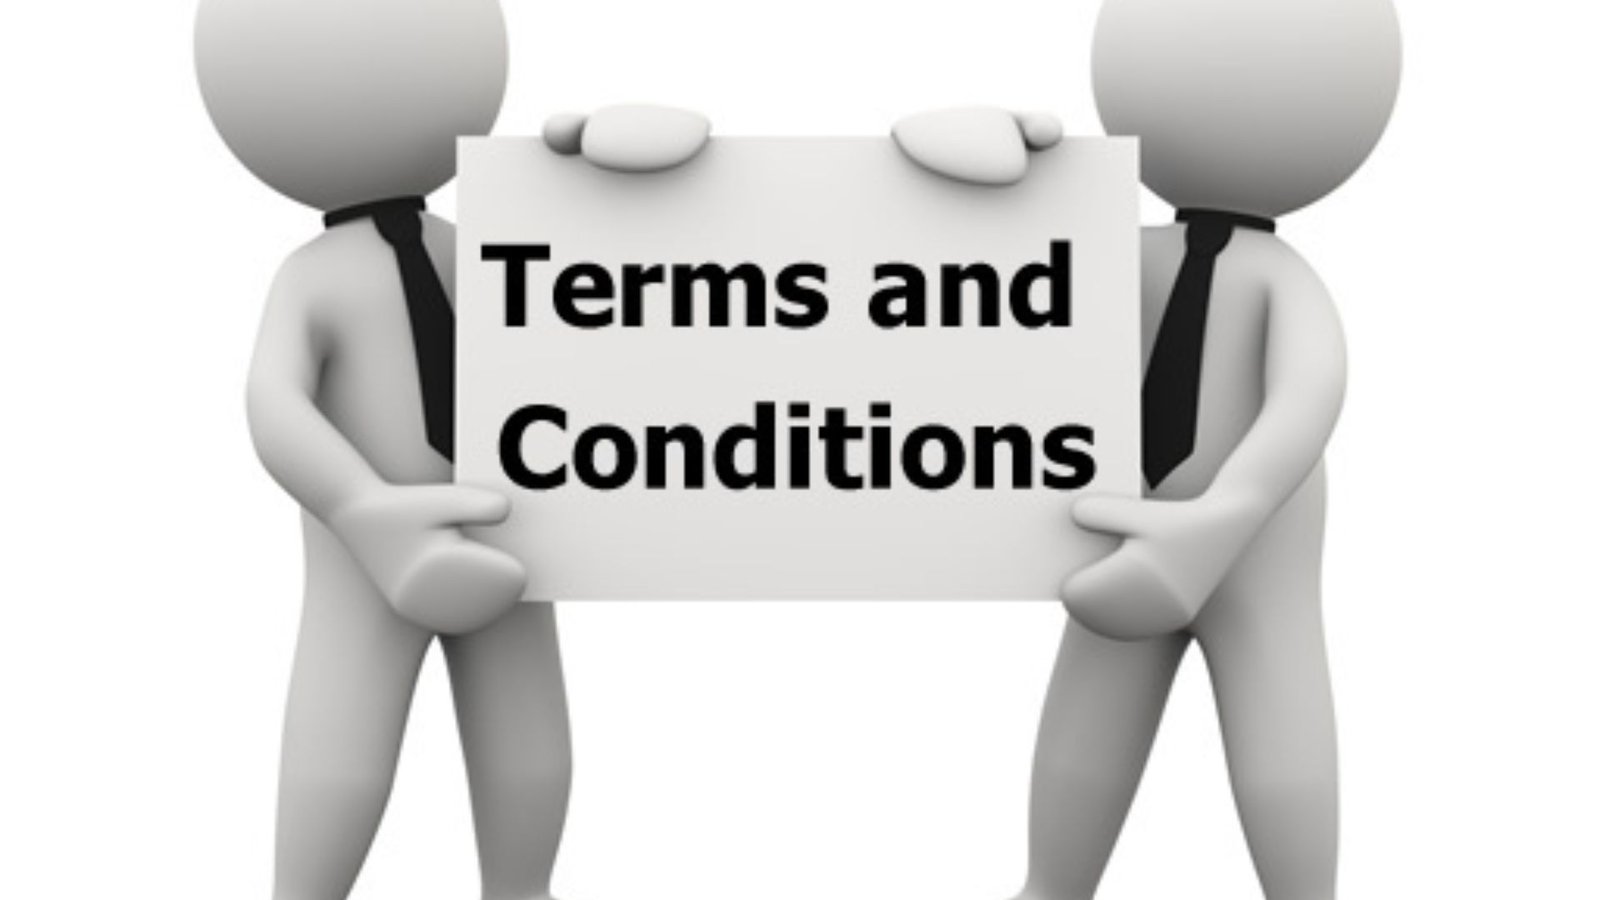 Terms and conditions 